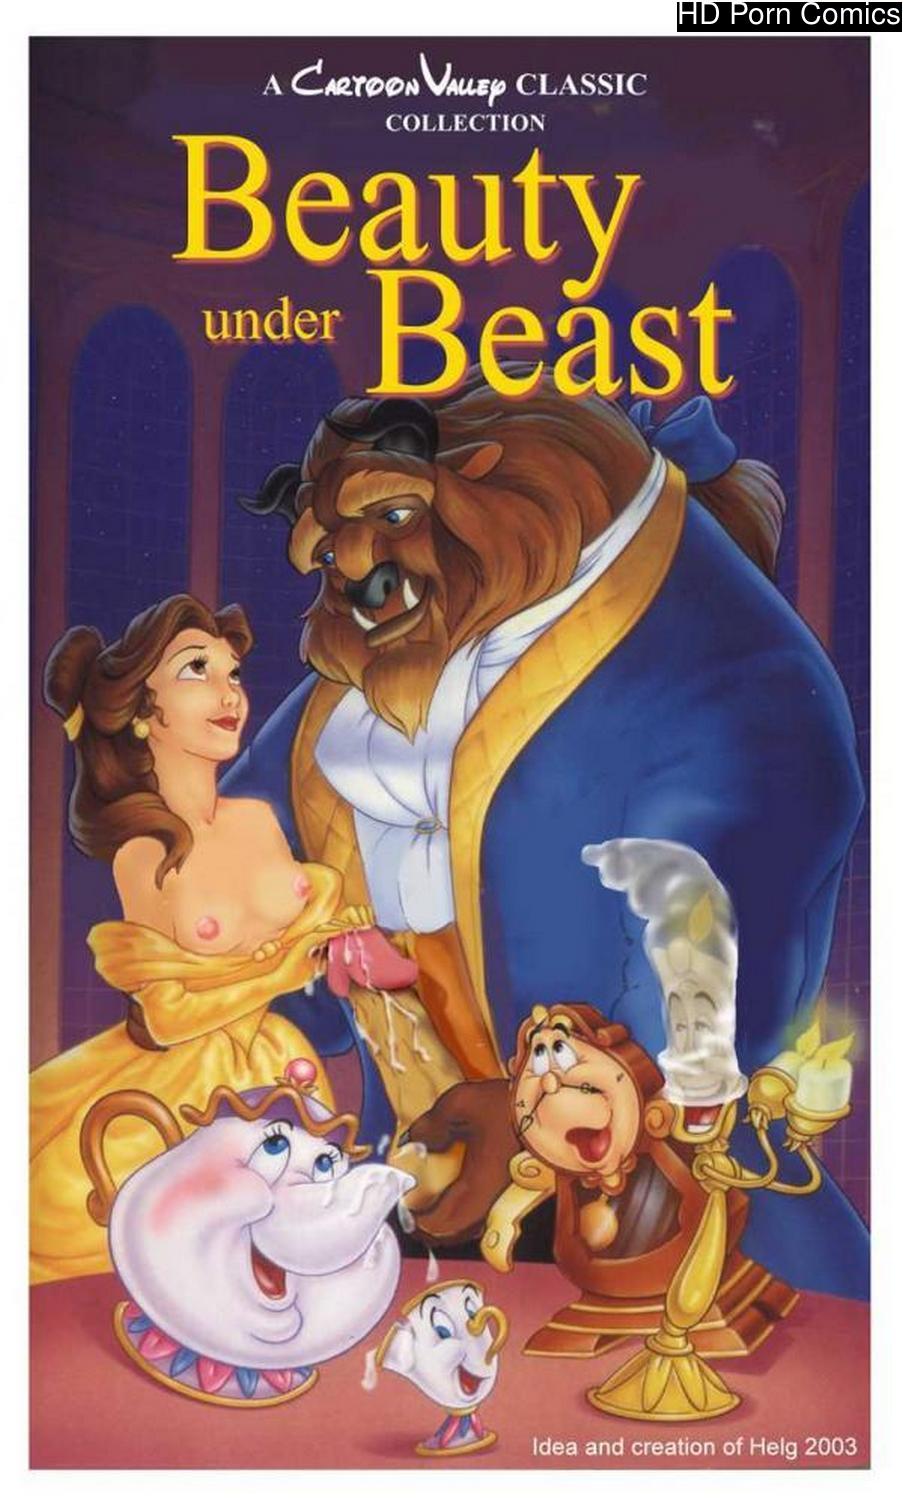 The porn and beauty beast Beauty And